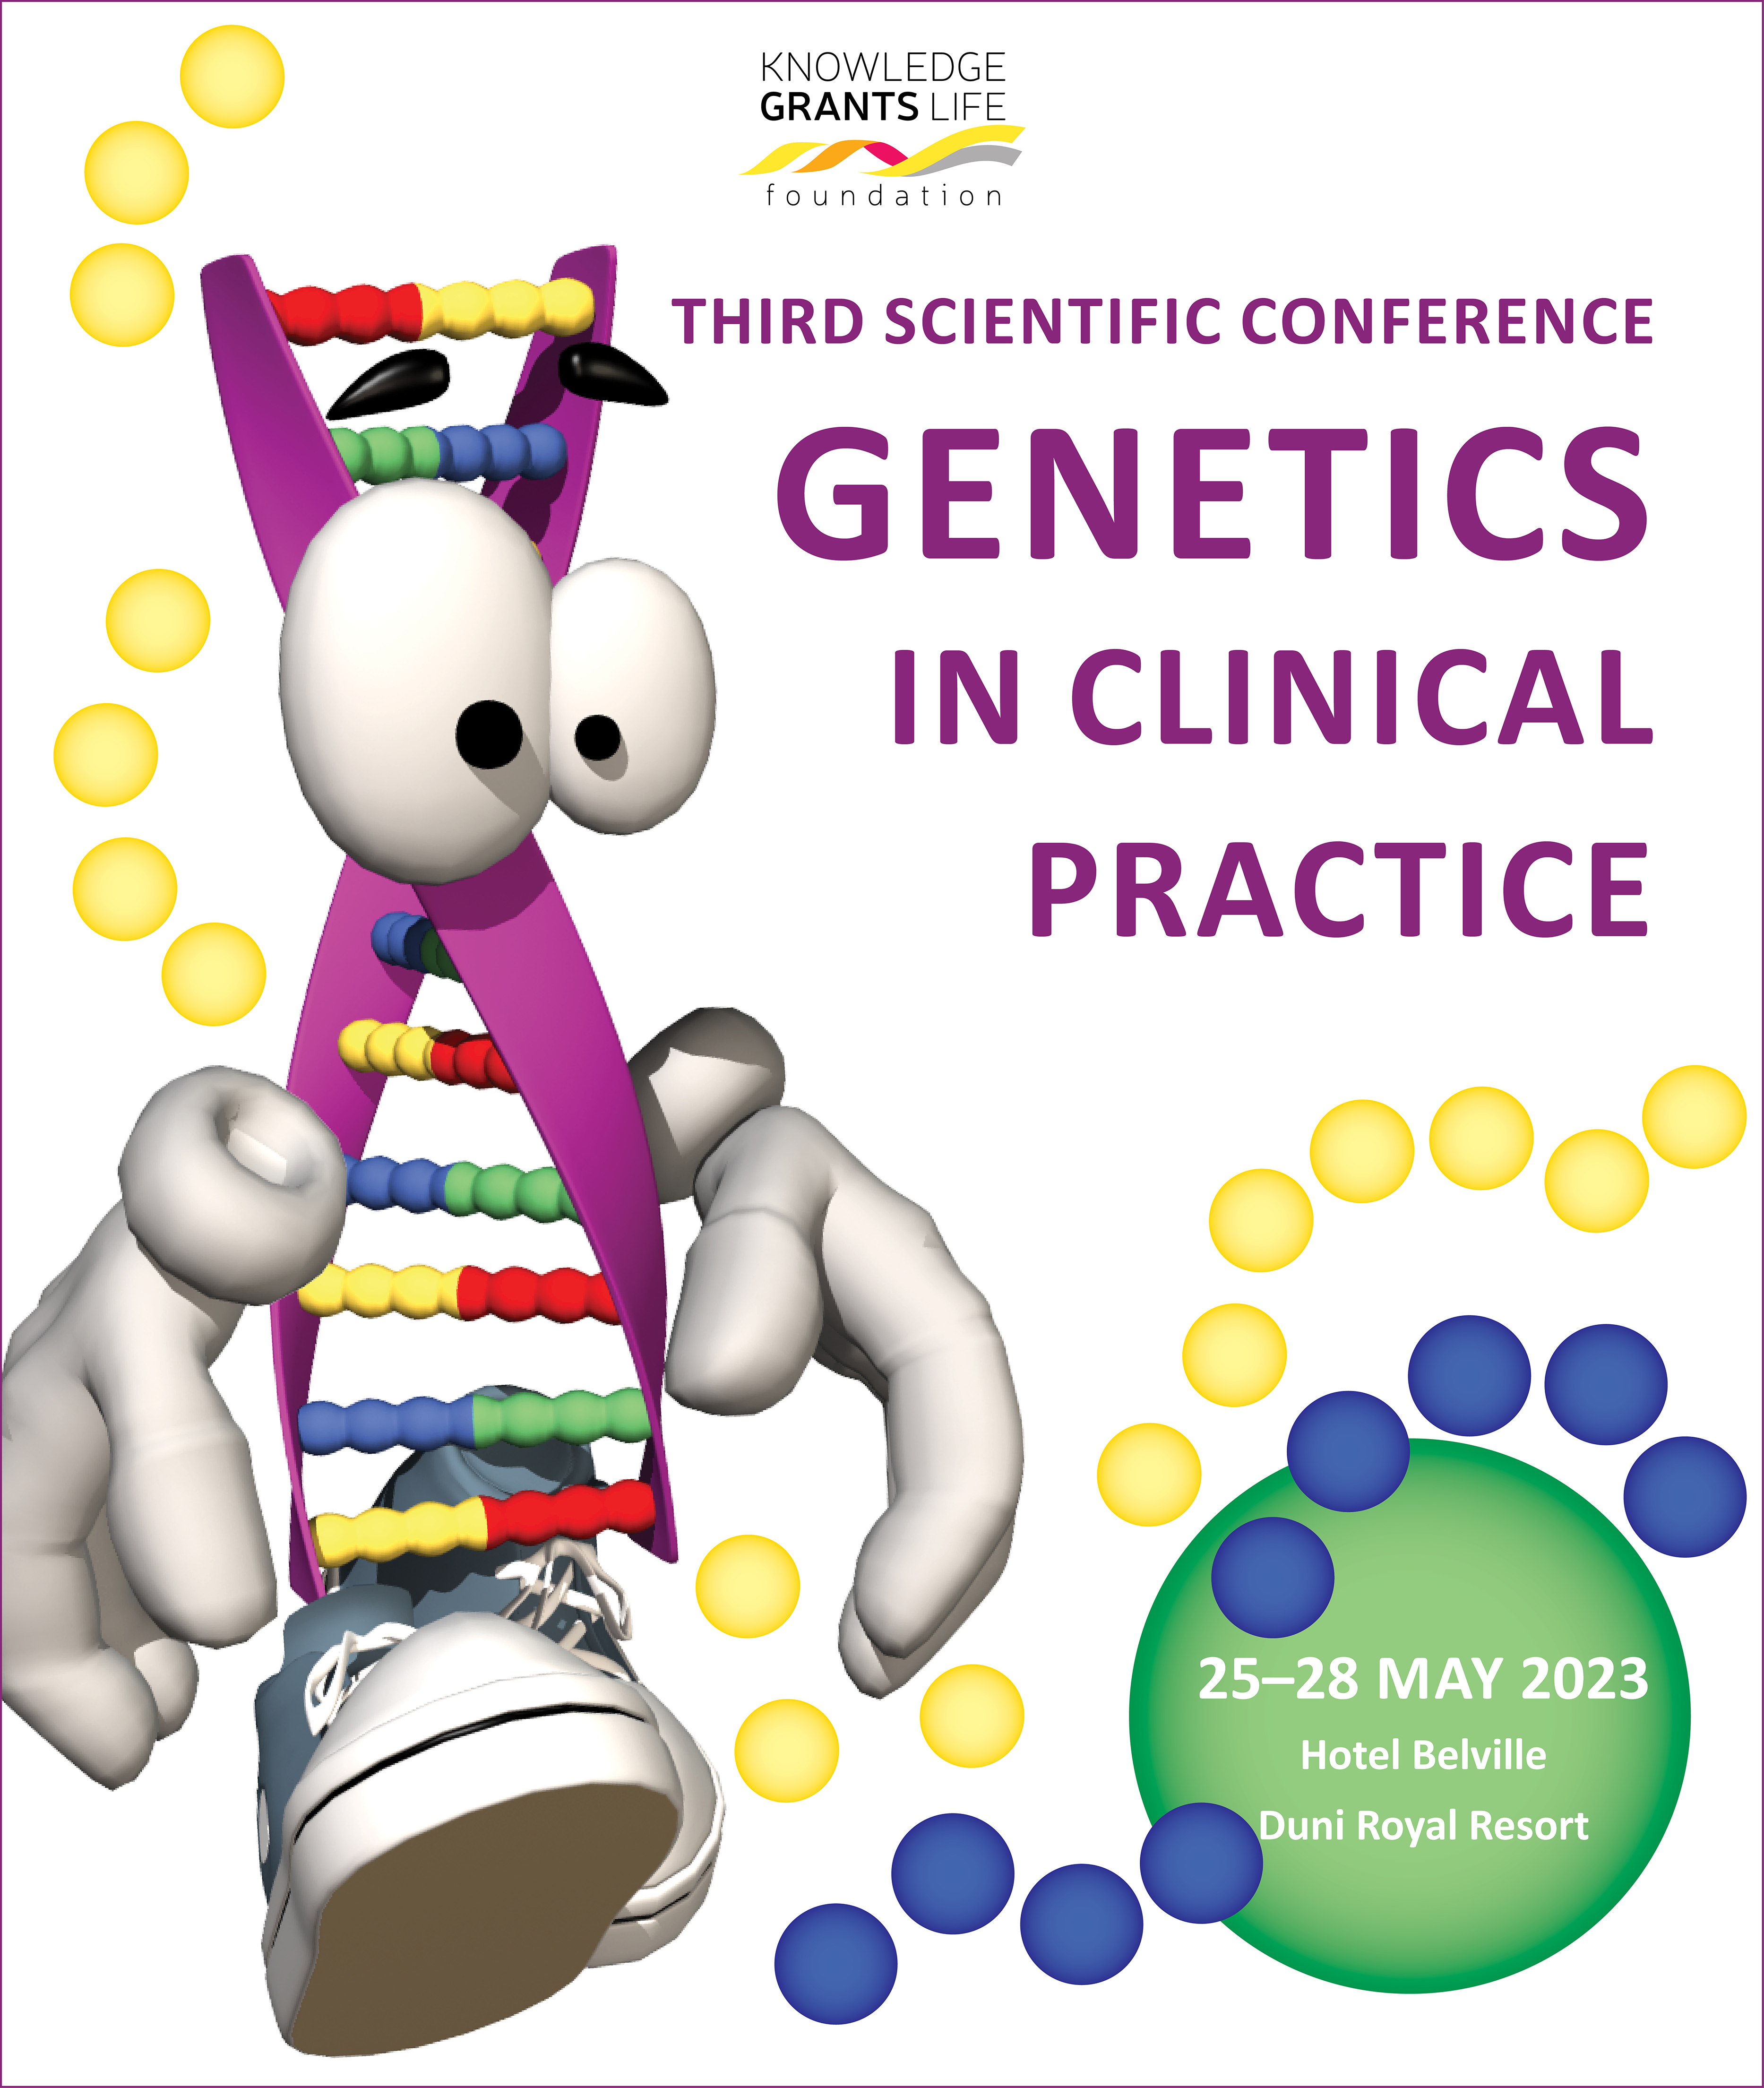 Third Scientific Conference “Genetics in Clinical Practice”